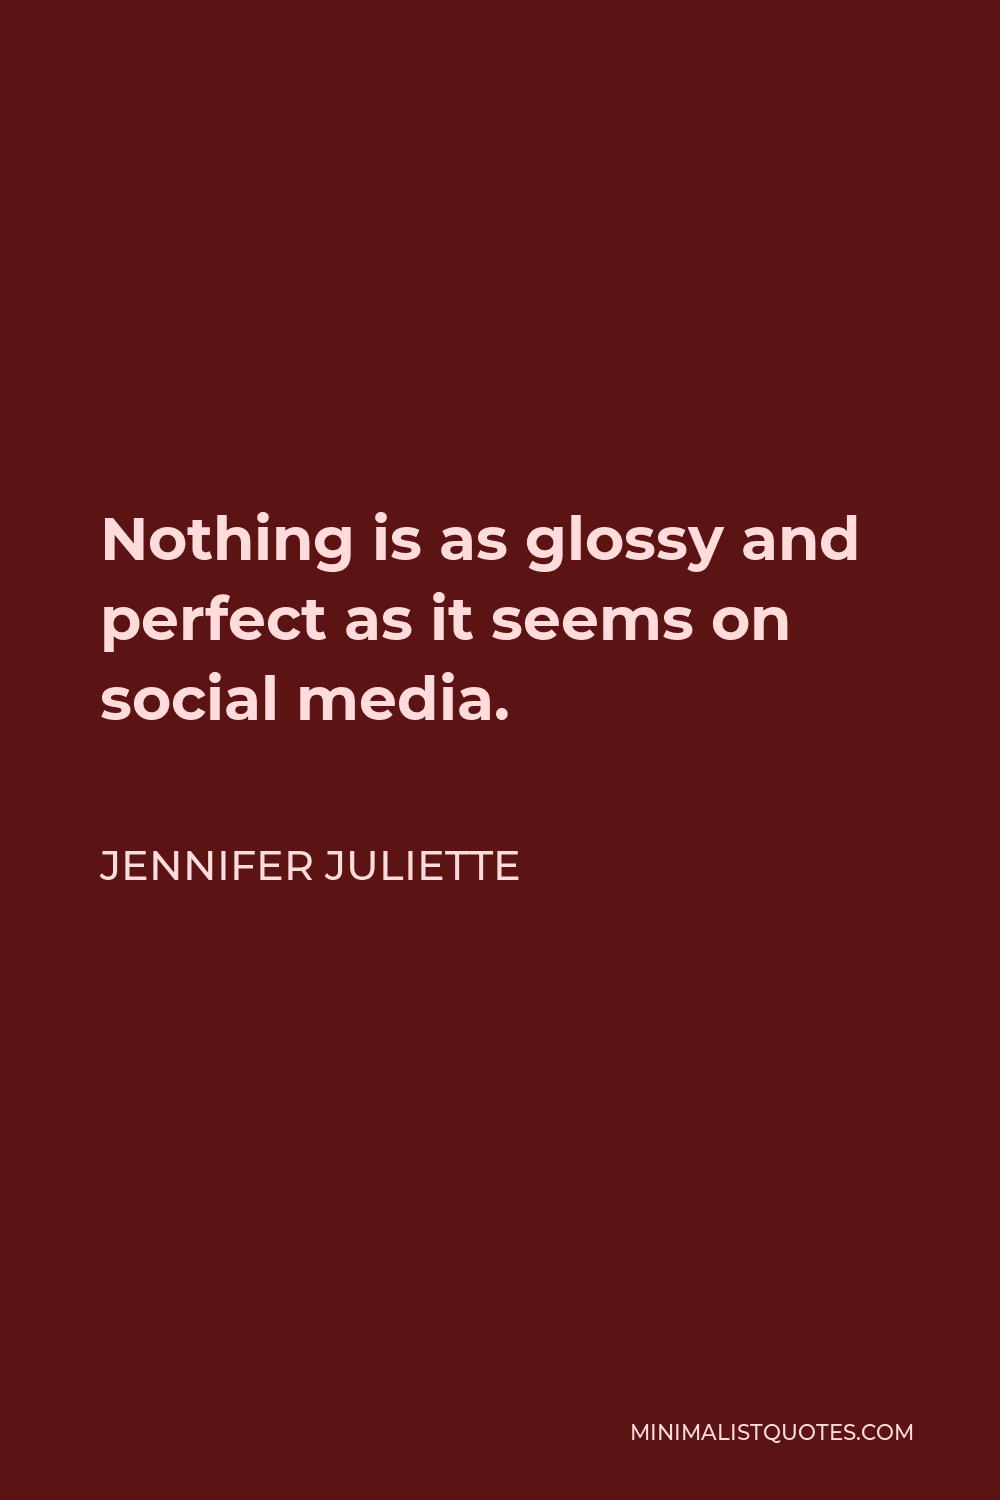 Jennifer Juliette Quote - Nothing is as glossy and perfect as it seems on social media.